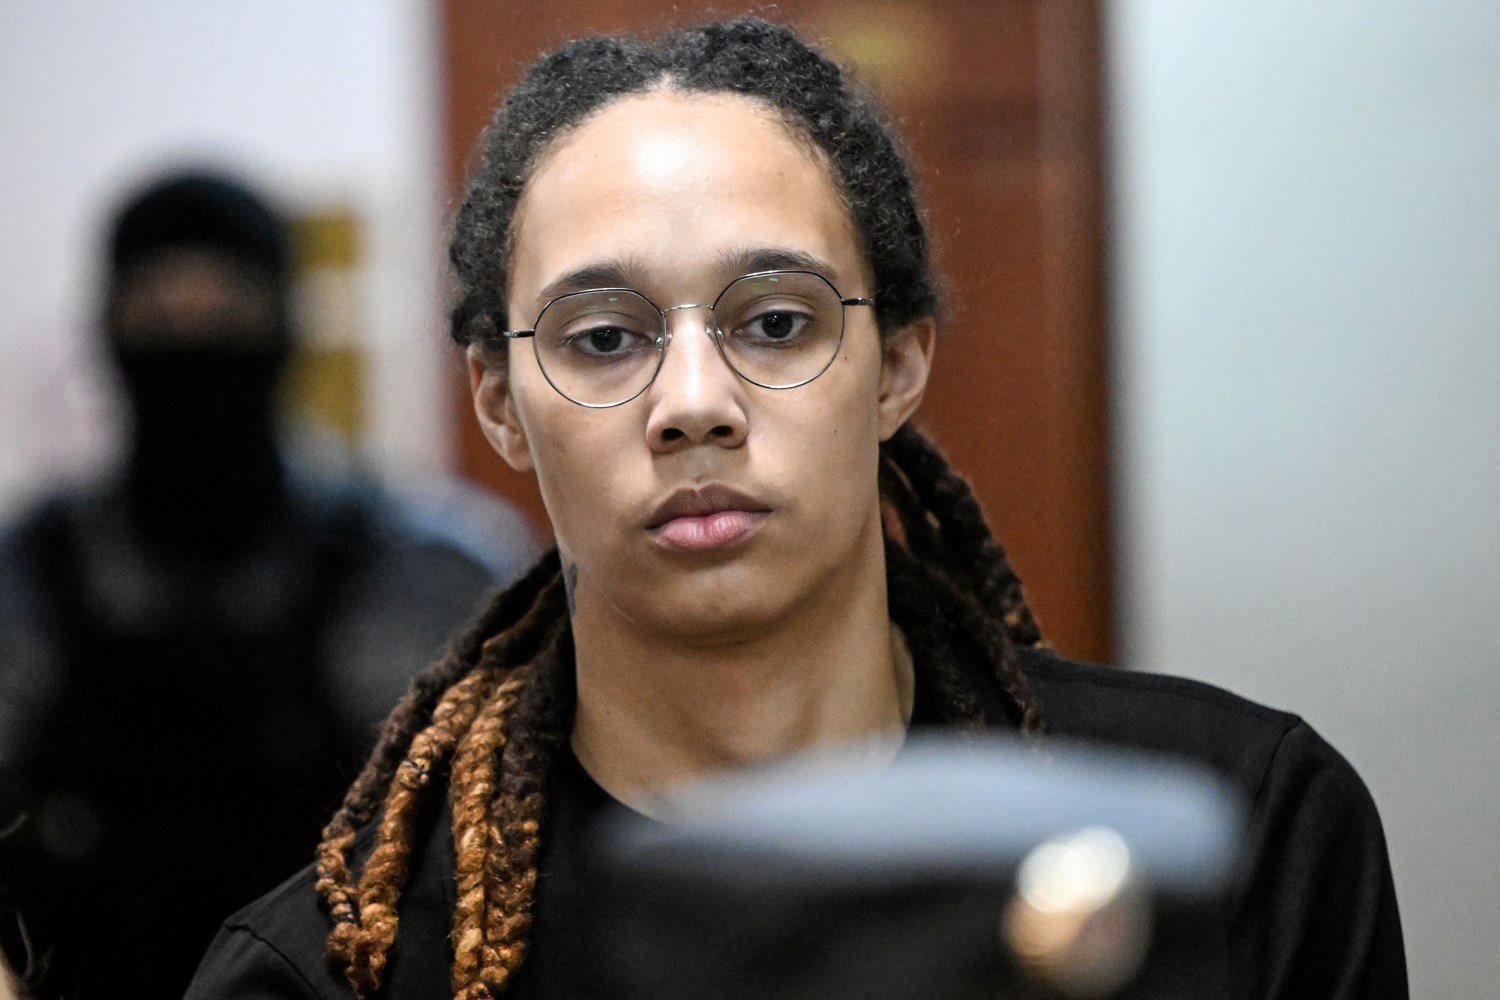 LIVE UPDATES: WNBA star Brittney Griner released from Russian custody